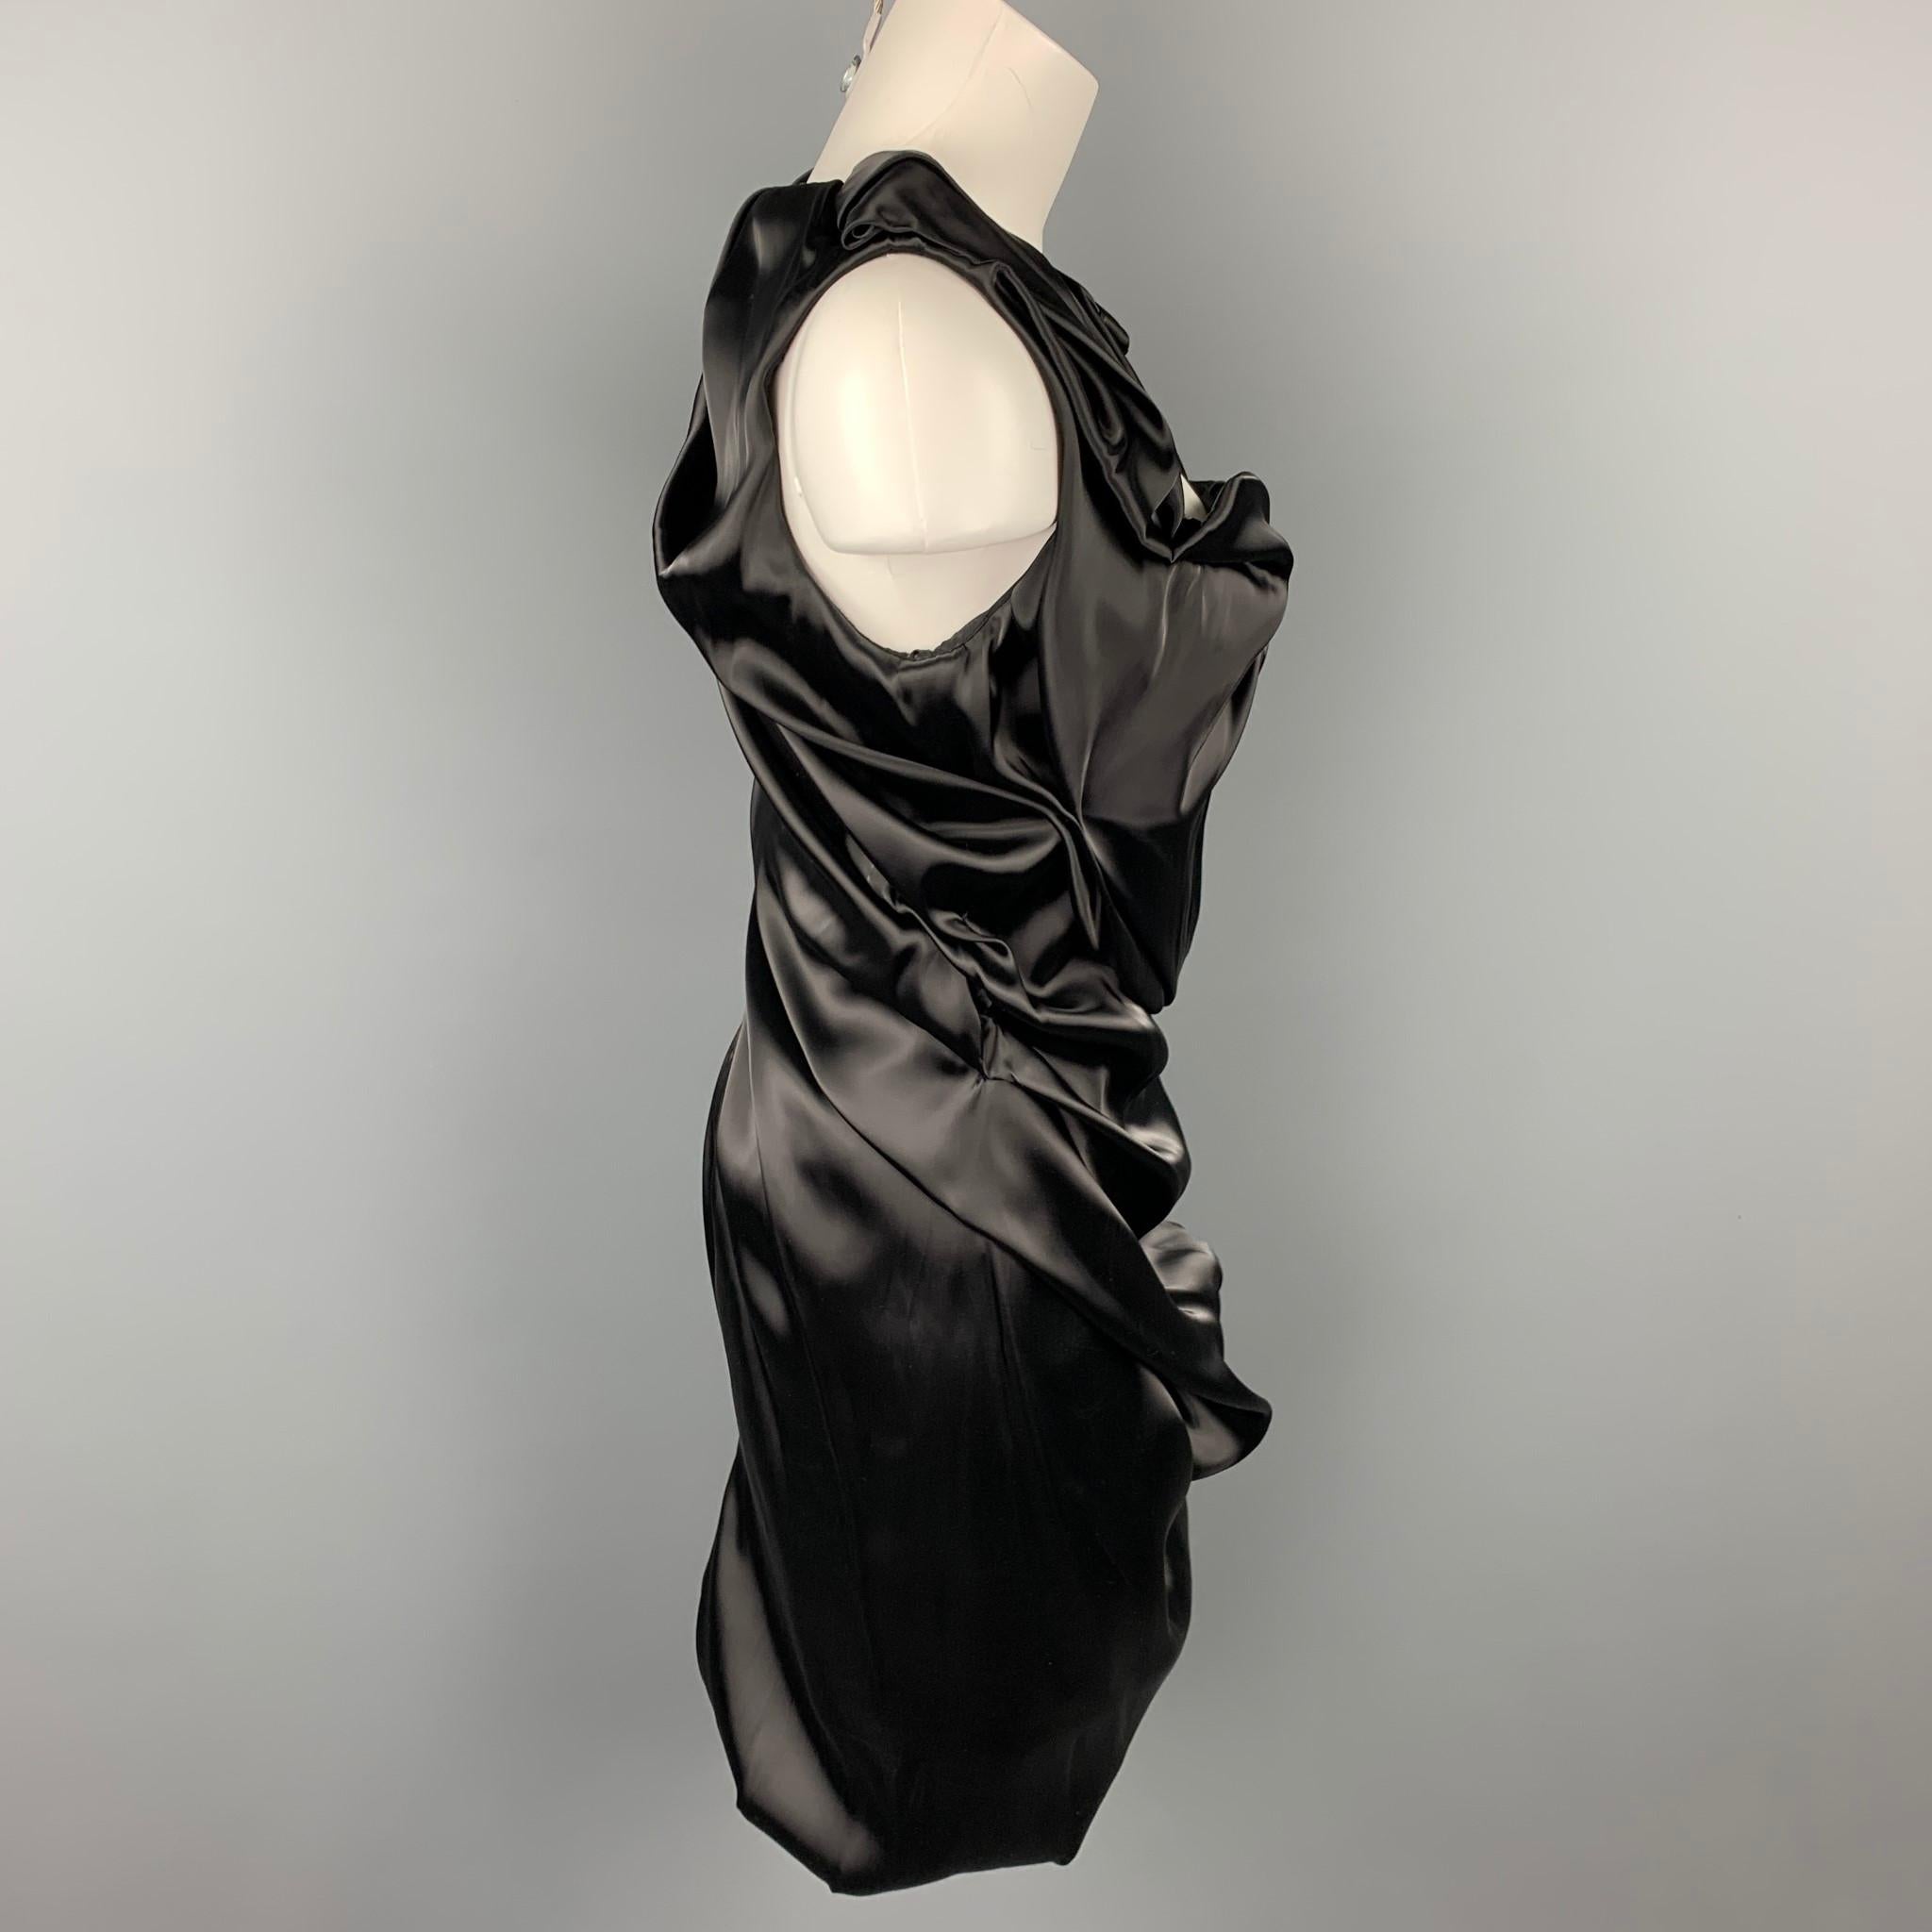 SOPHIA KOKOSALAK cocktail dress comes in a black satin nylon blend featuring  ruched design, snap button shoulder, and a side zip up closure. Made in Italy.

Very Good Pre-Owned Condition.
Marked: IT 42

Measurements:

Bust: 30 in.
Waist: 26